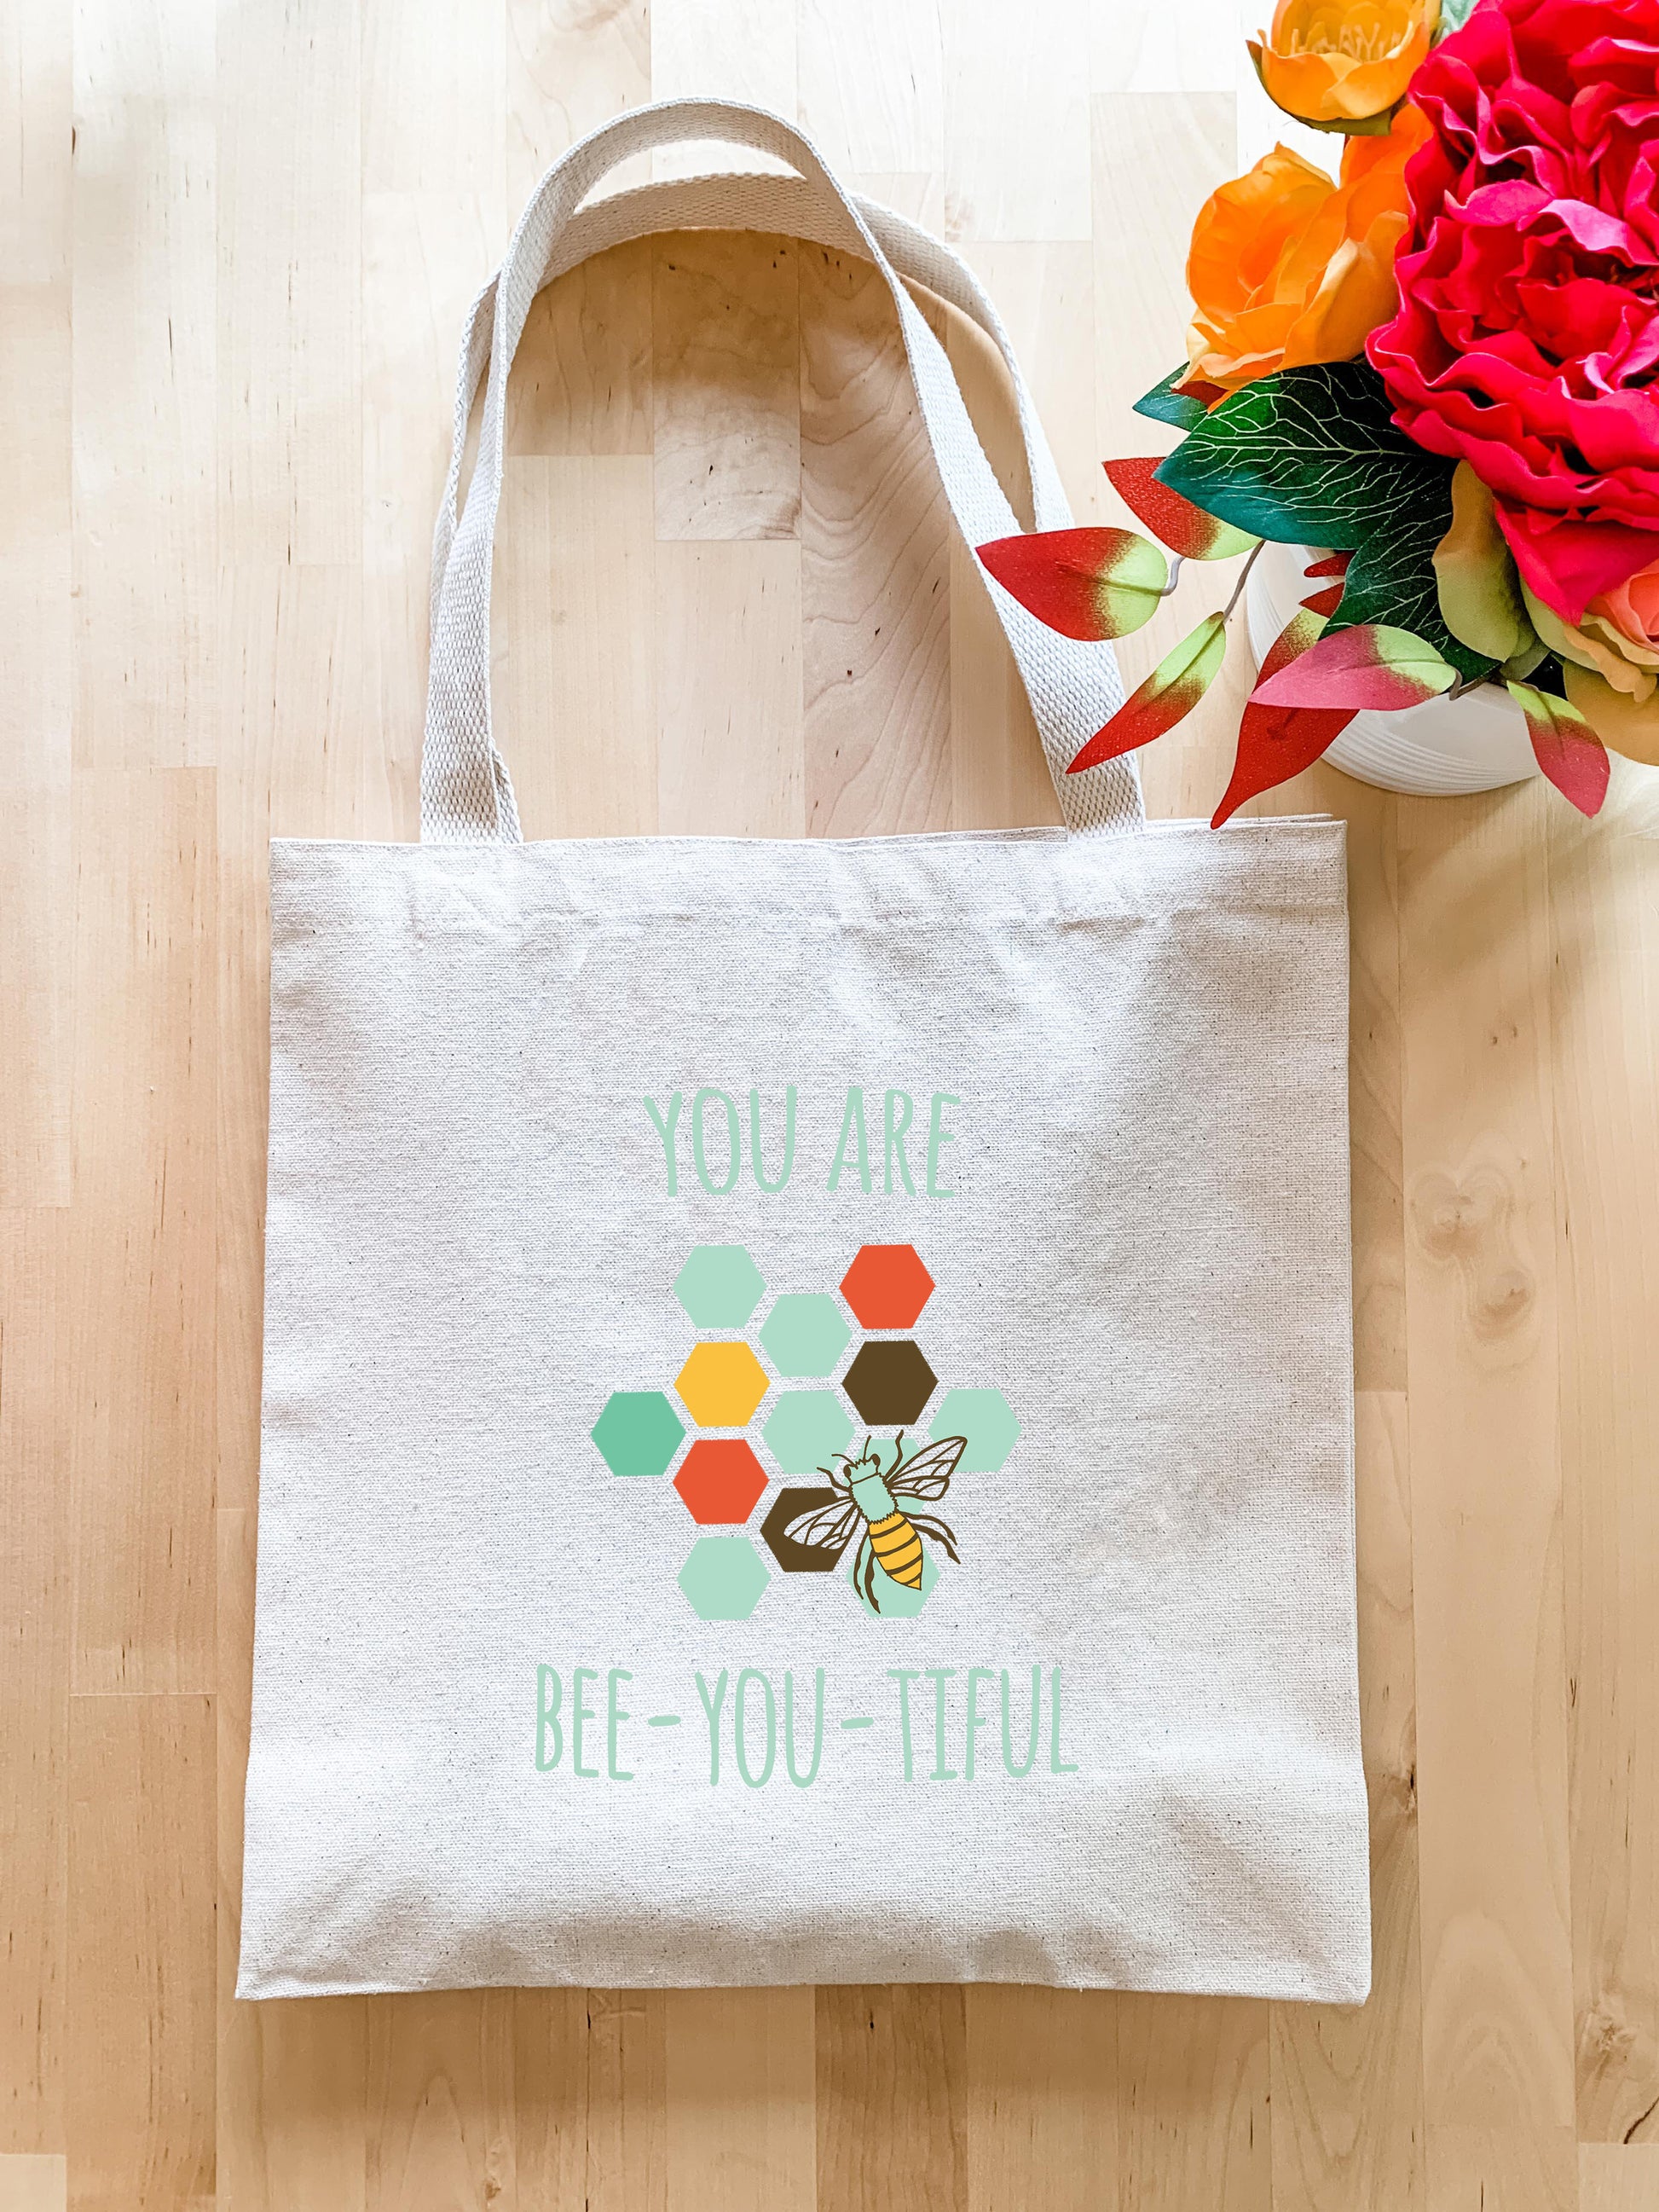 a white tote bag with a bee you - tiful design